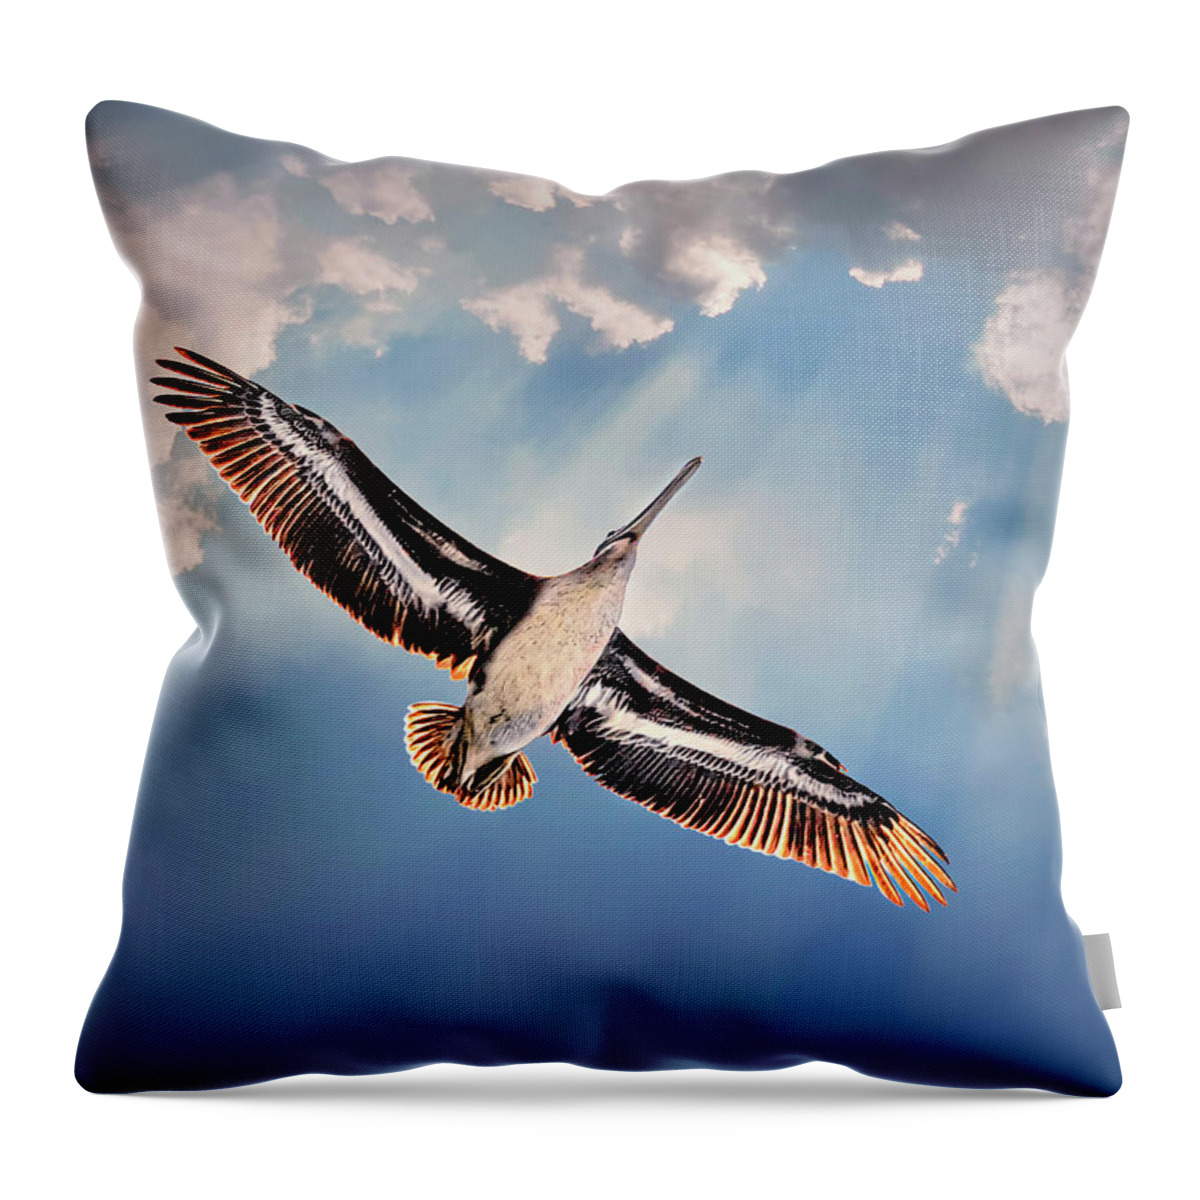 Soaring Throw Pillow featuring the photograph Soaring Overhead by Endre Balogh